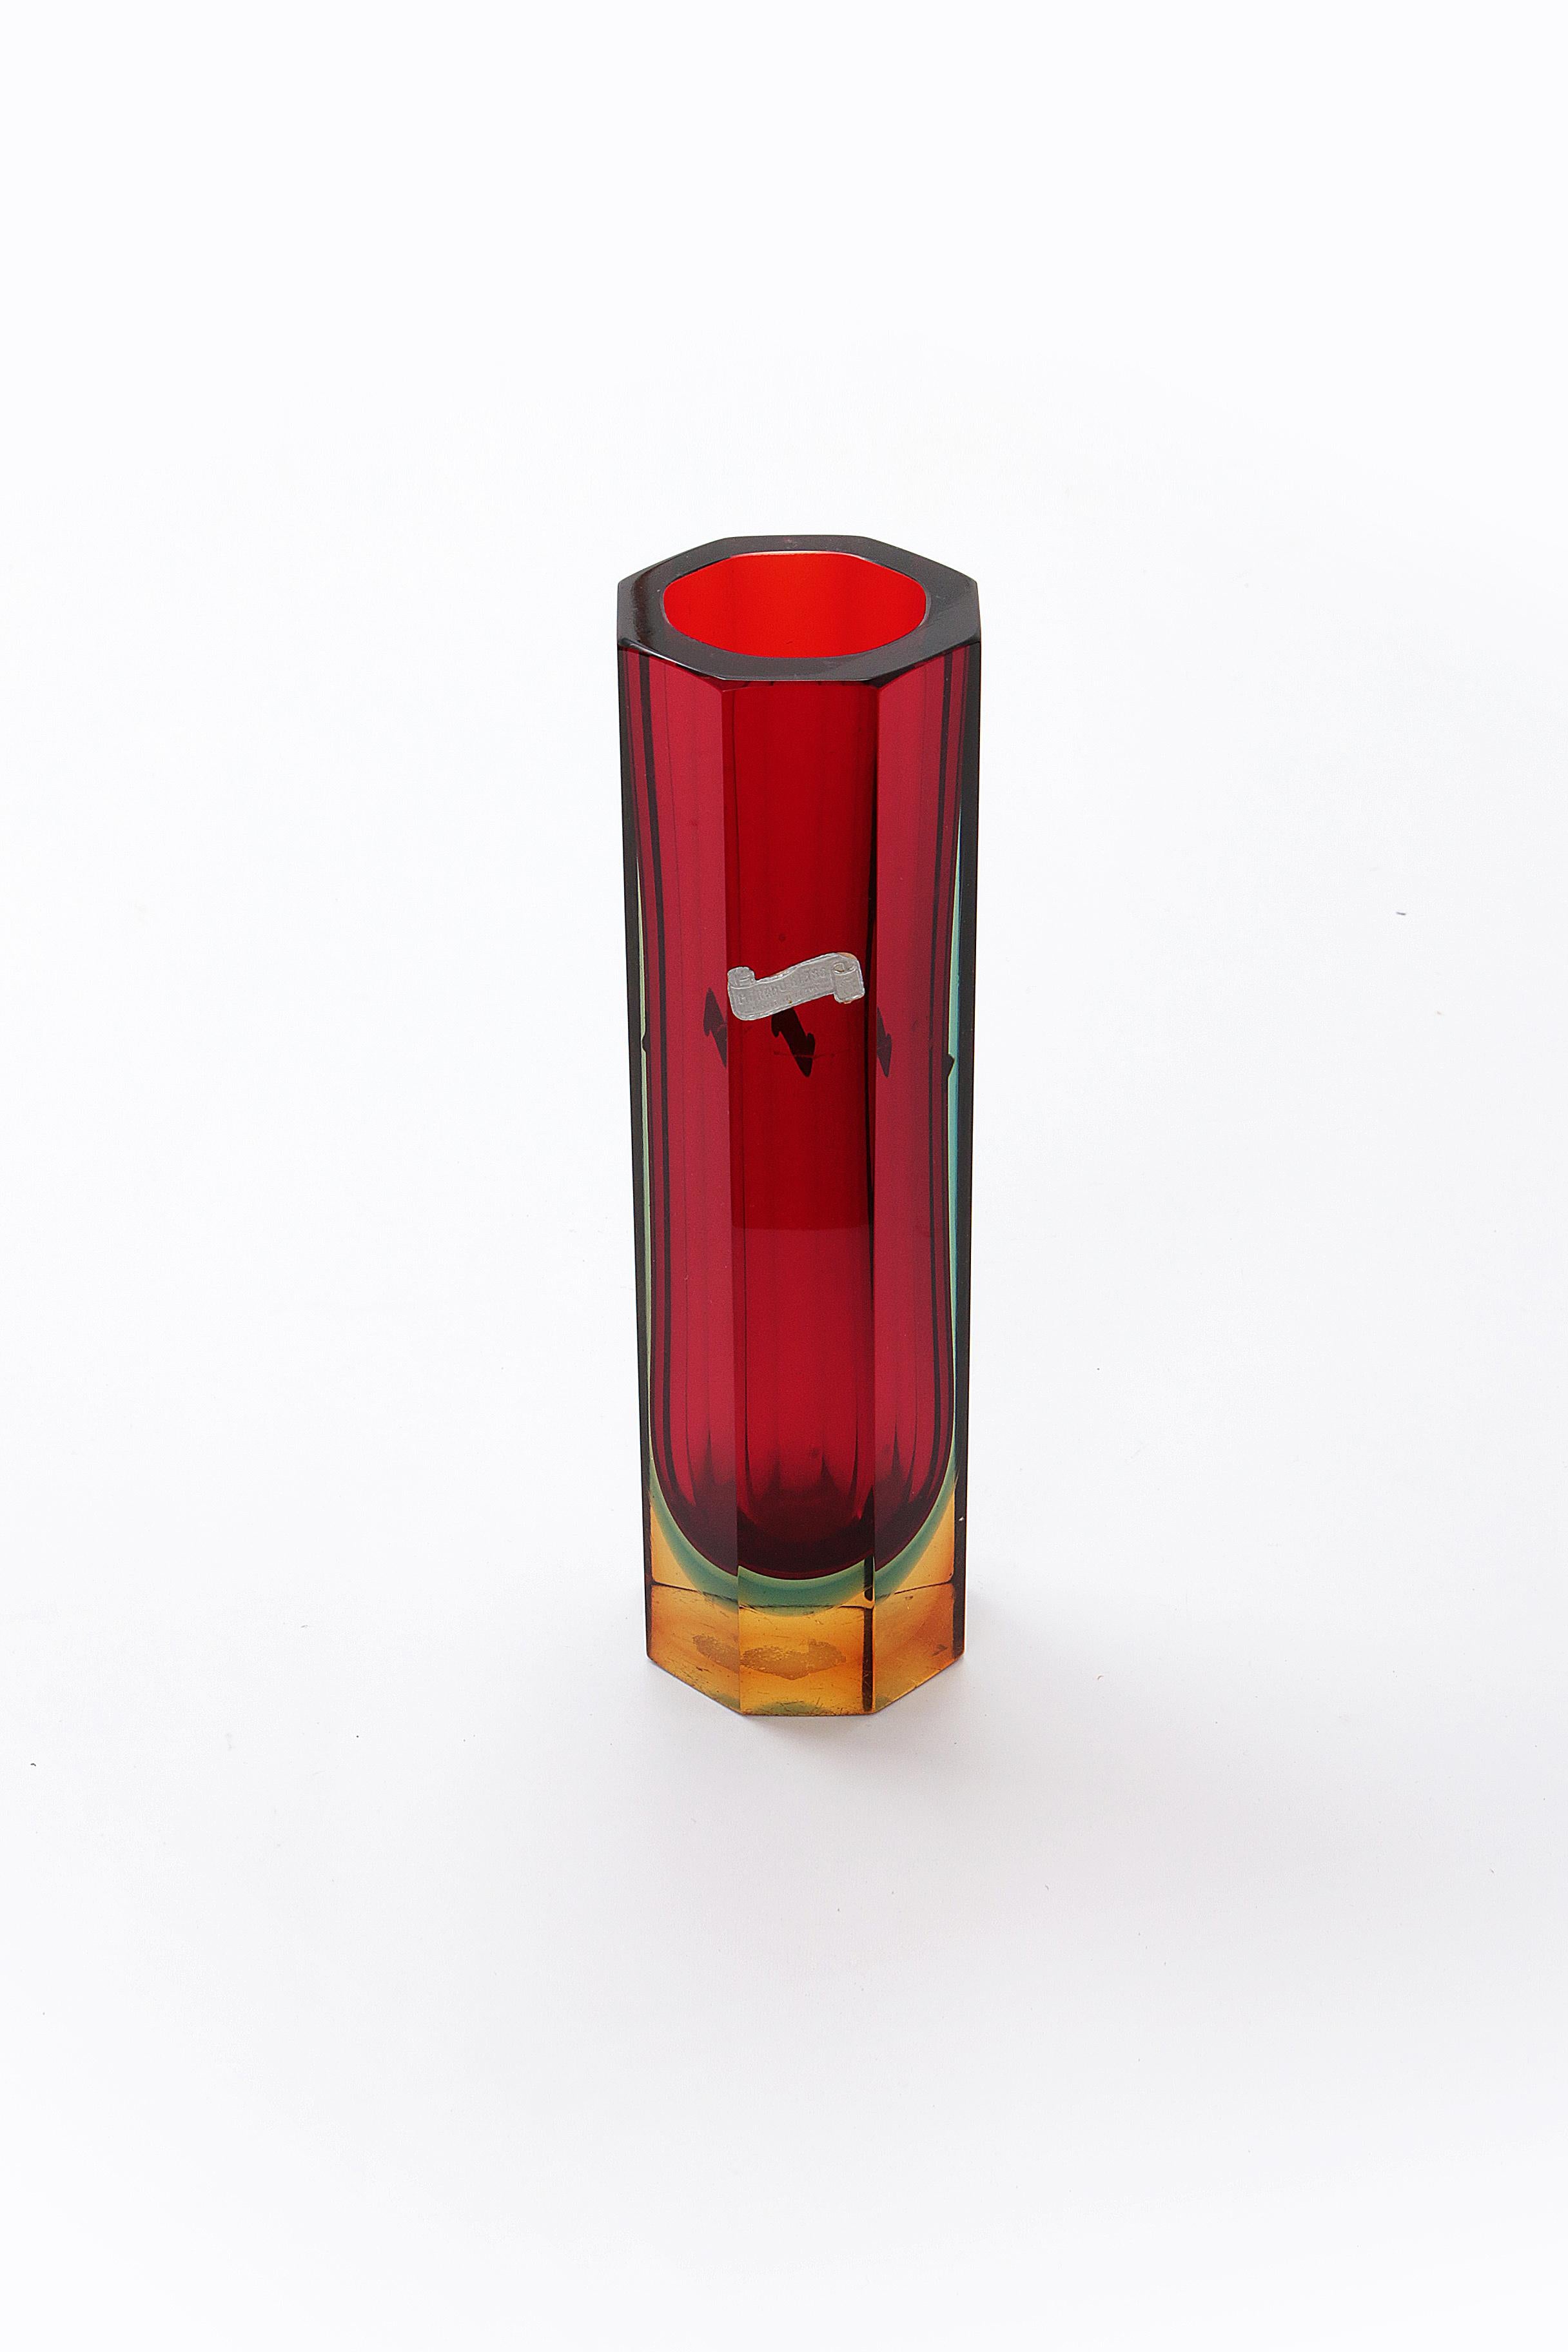 Murano block vase 8-sided, the color is predominantly red with green, blue and yellow.

Vintage design vase Murano square block vase red/blue, intact, made by Crystal/Glass master Flavio Poli (1900-1984).

He was an Italian artist, known for his